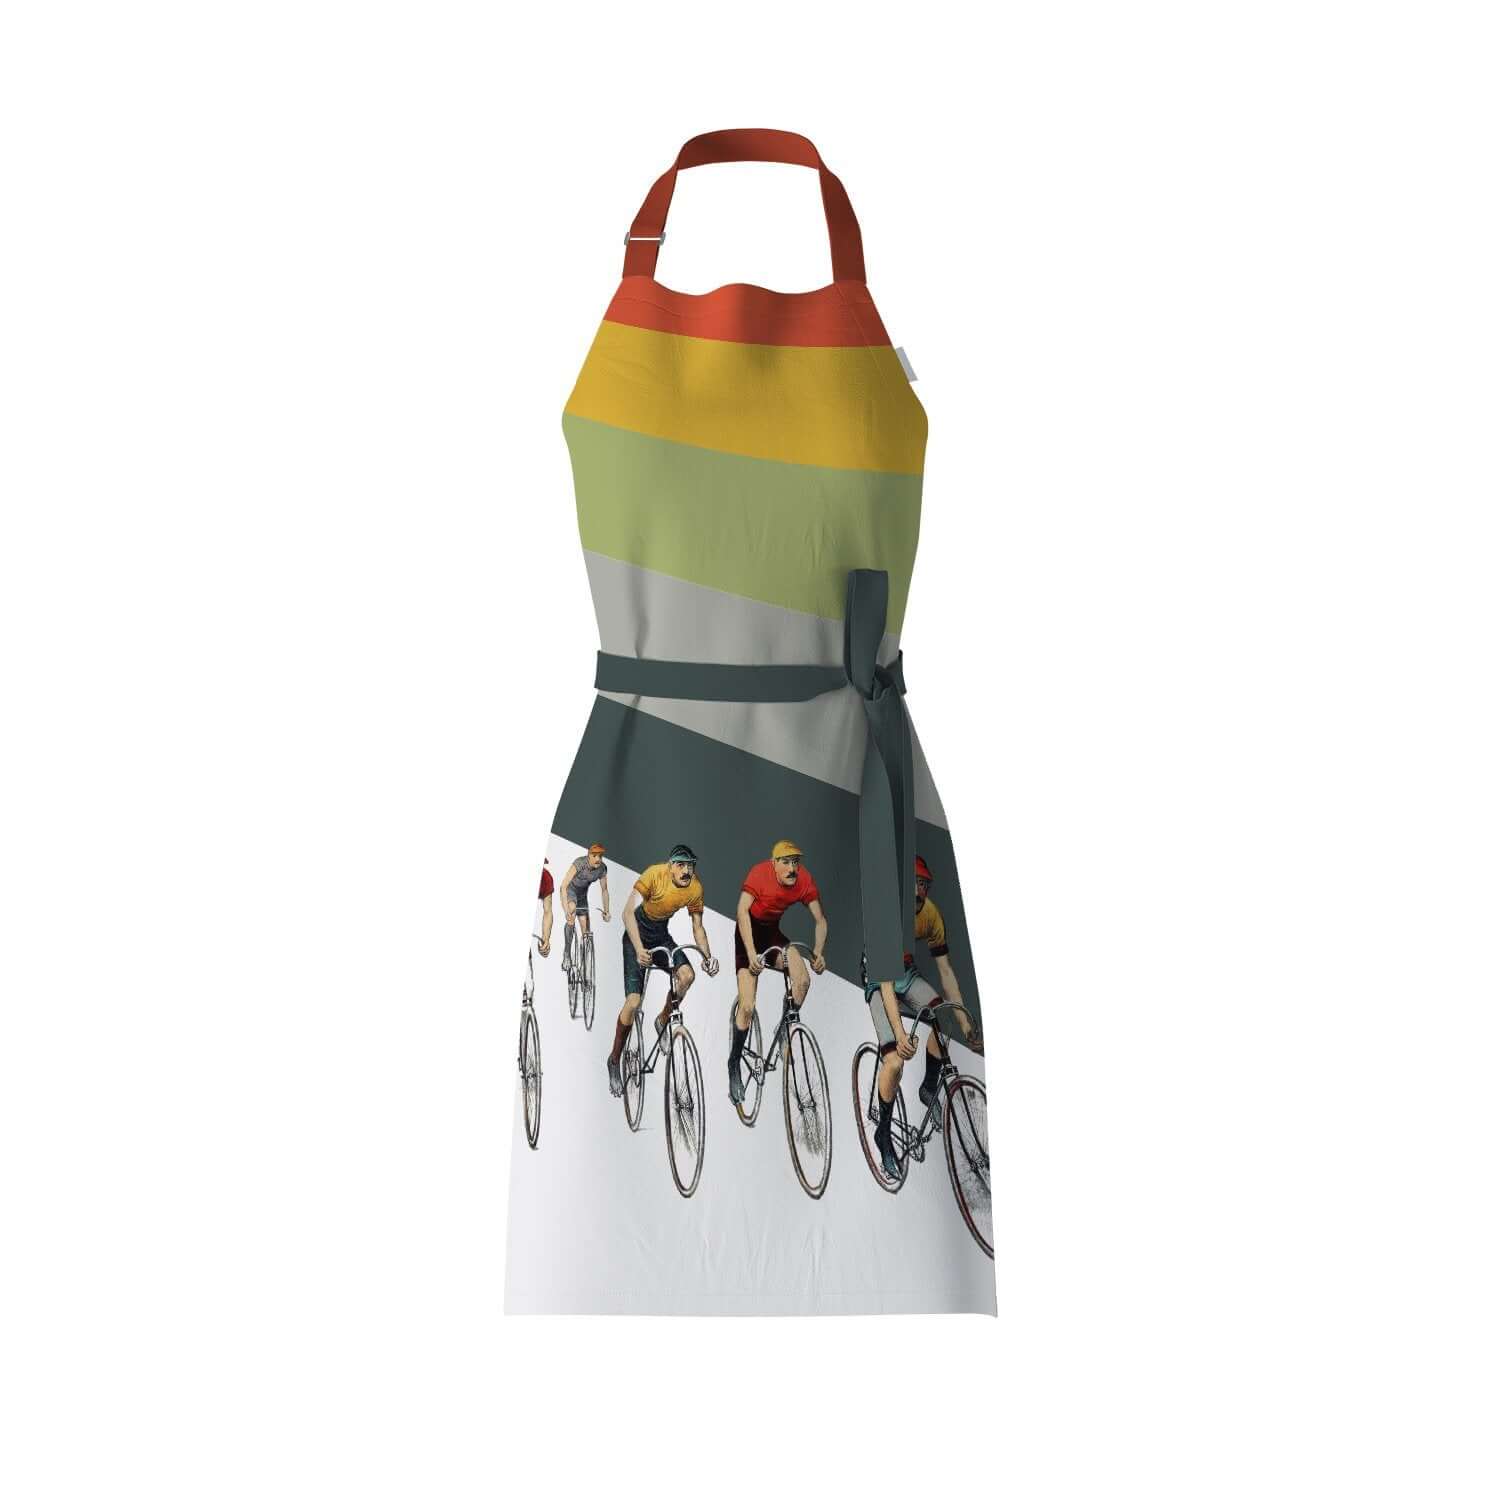 Cameron Vintage Cycling Bib Apron from Mustard and Gray with vintage print of road racing cyclists with moustaches, against stripes of red, yellow, green and grey. 